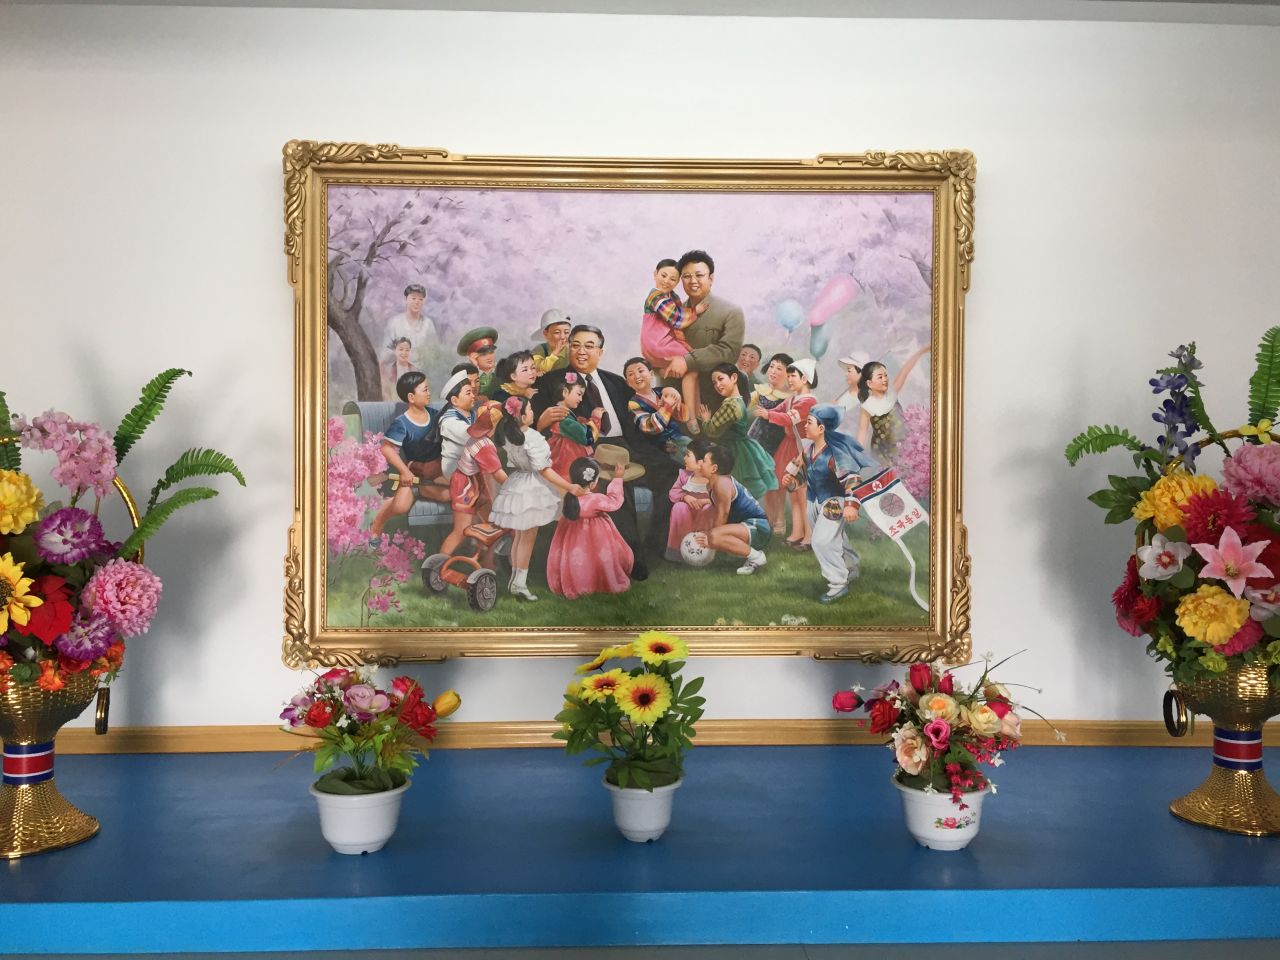 North Korean founder Kim Il Sung, who died in 1994, and his son Kim Jong Il, who died in 2011, are surrounded by beaming children in this popular painting. The supreme leaders visited the Jang Chon cooperative farm on multiple occasions -- the founder himself made 16 trips.